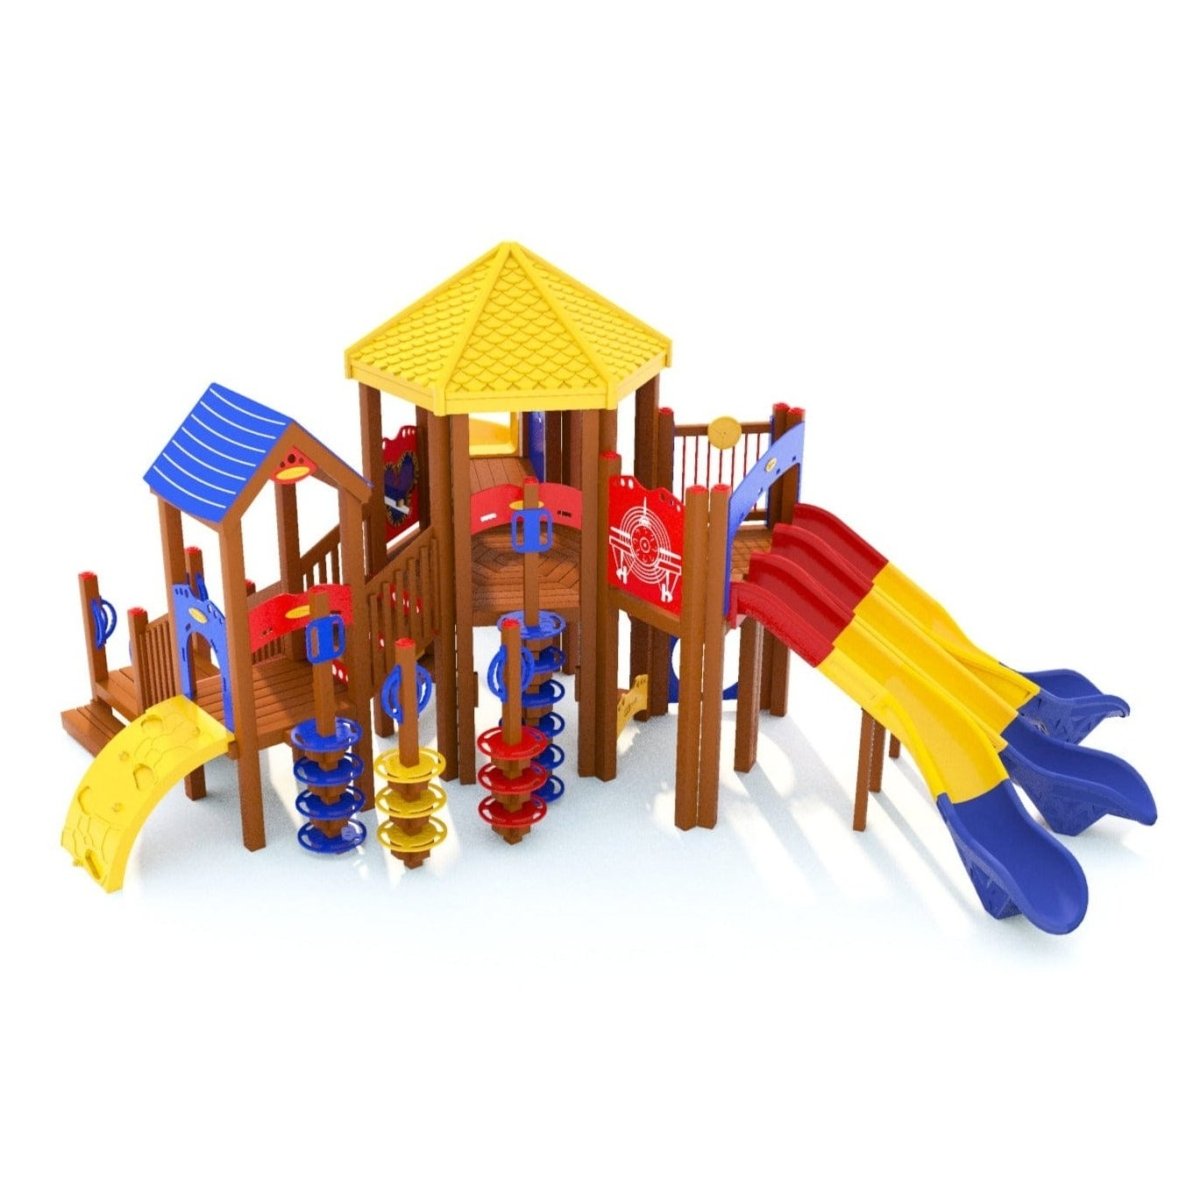 Cyclone Spin Playset - School-Age Playgrounds - Playtopia, Inc.